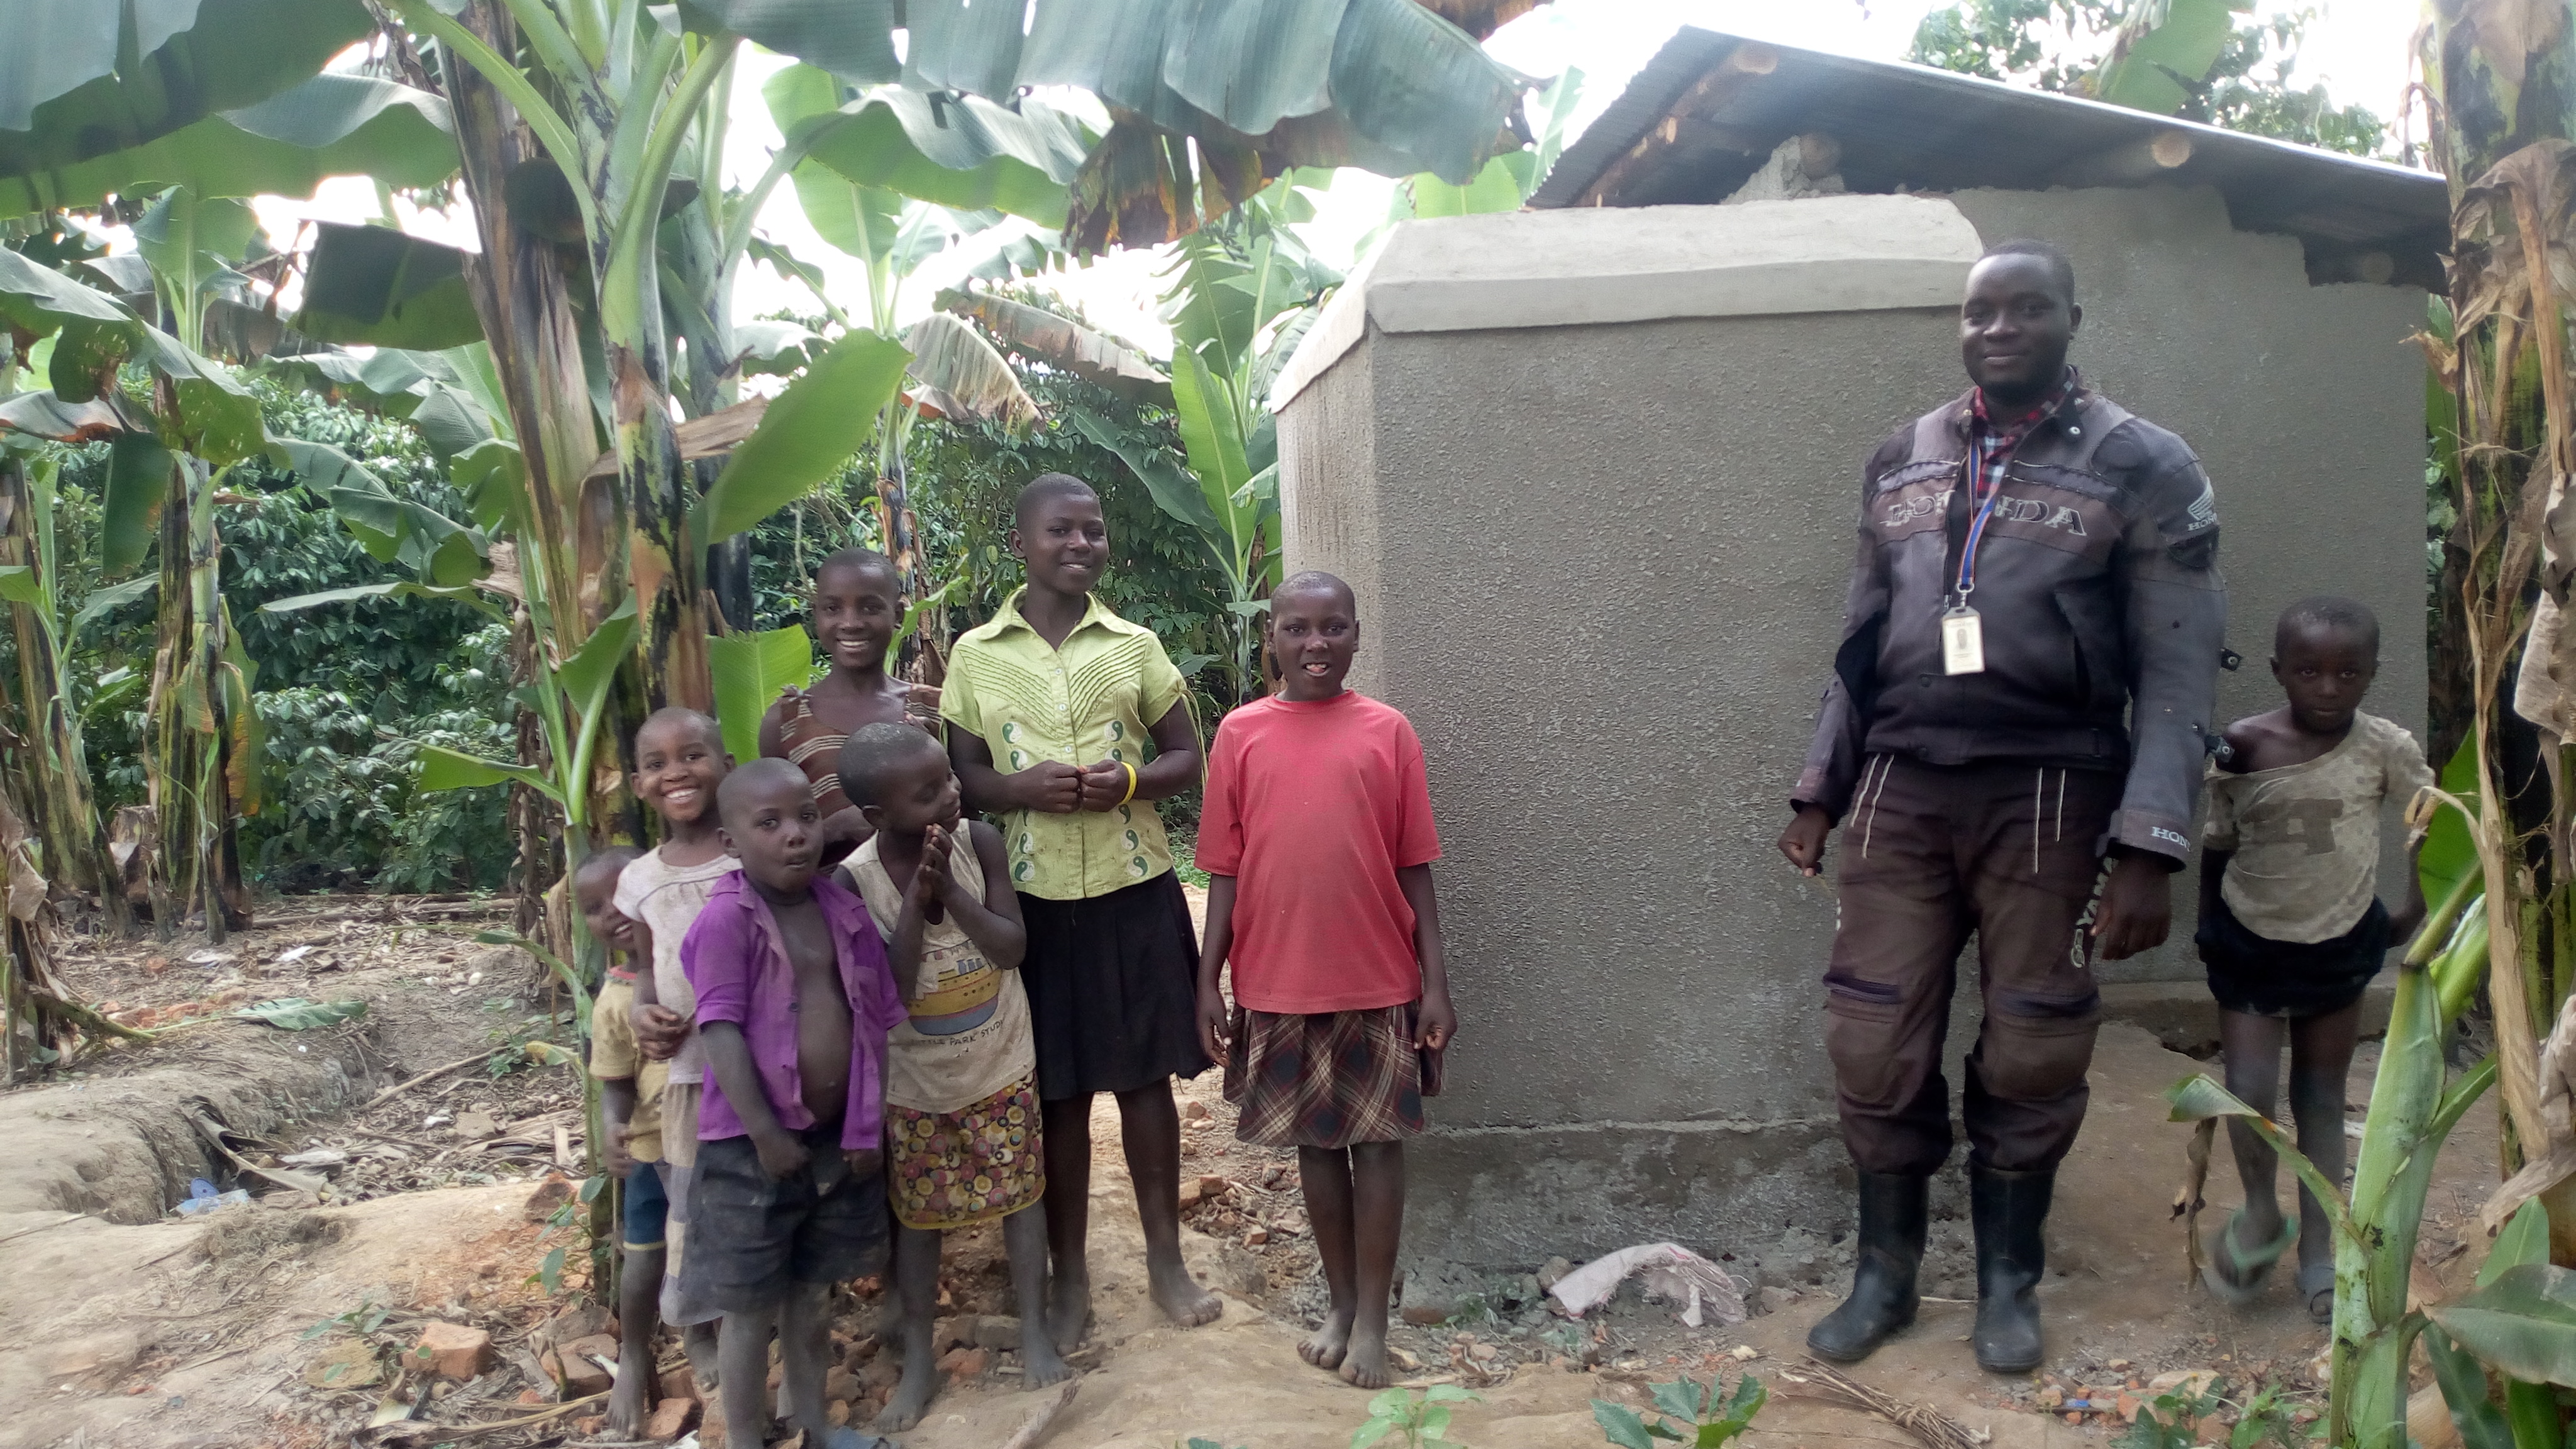 VisionFund staff, Denis, poses with children of Mariam Namutebi near their newly constructed latrine. The new laterine was constructed with a loan from VisionFund.